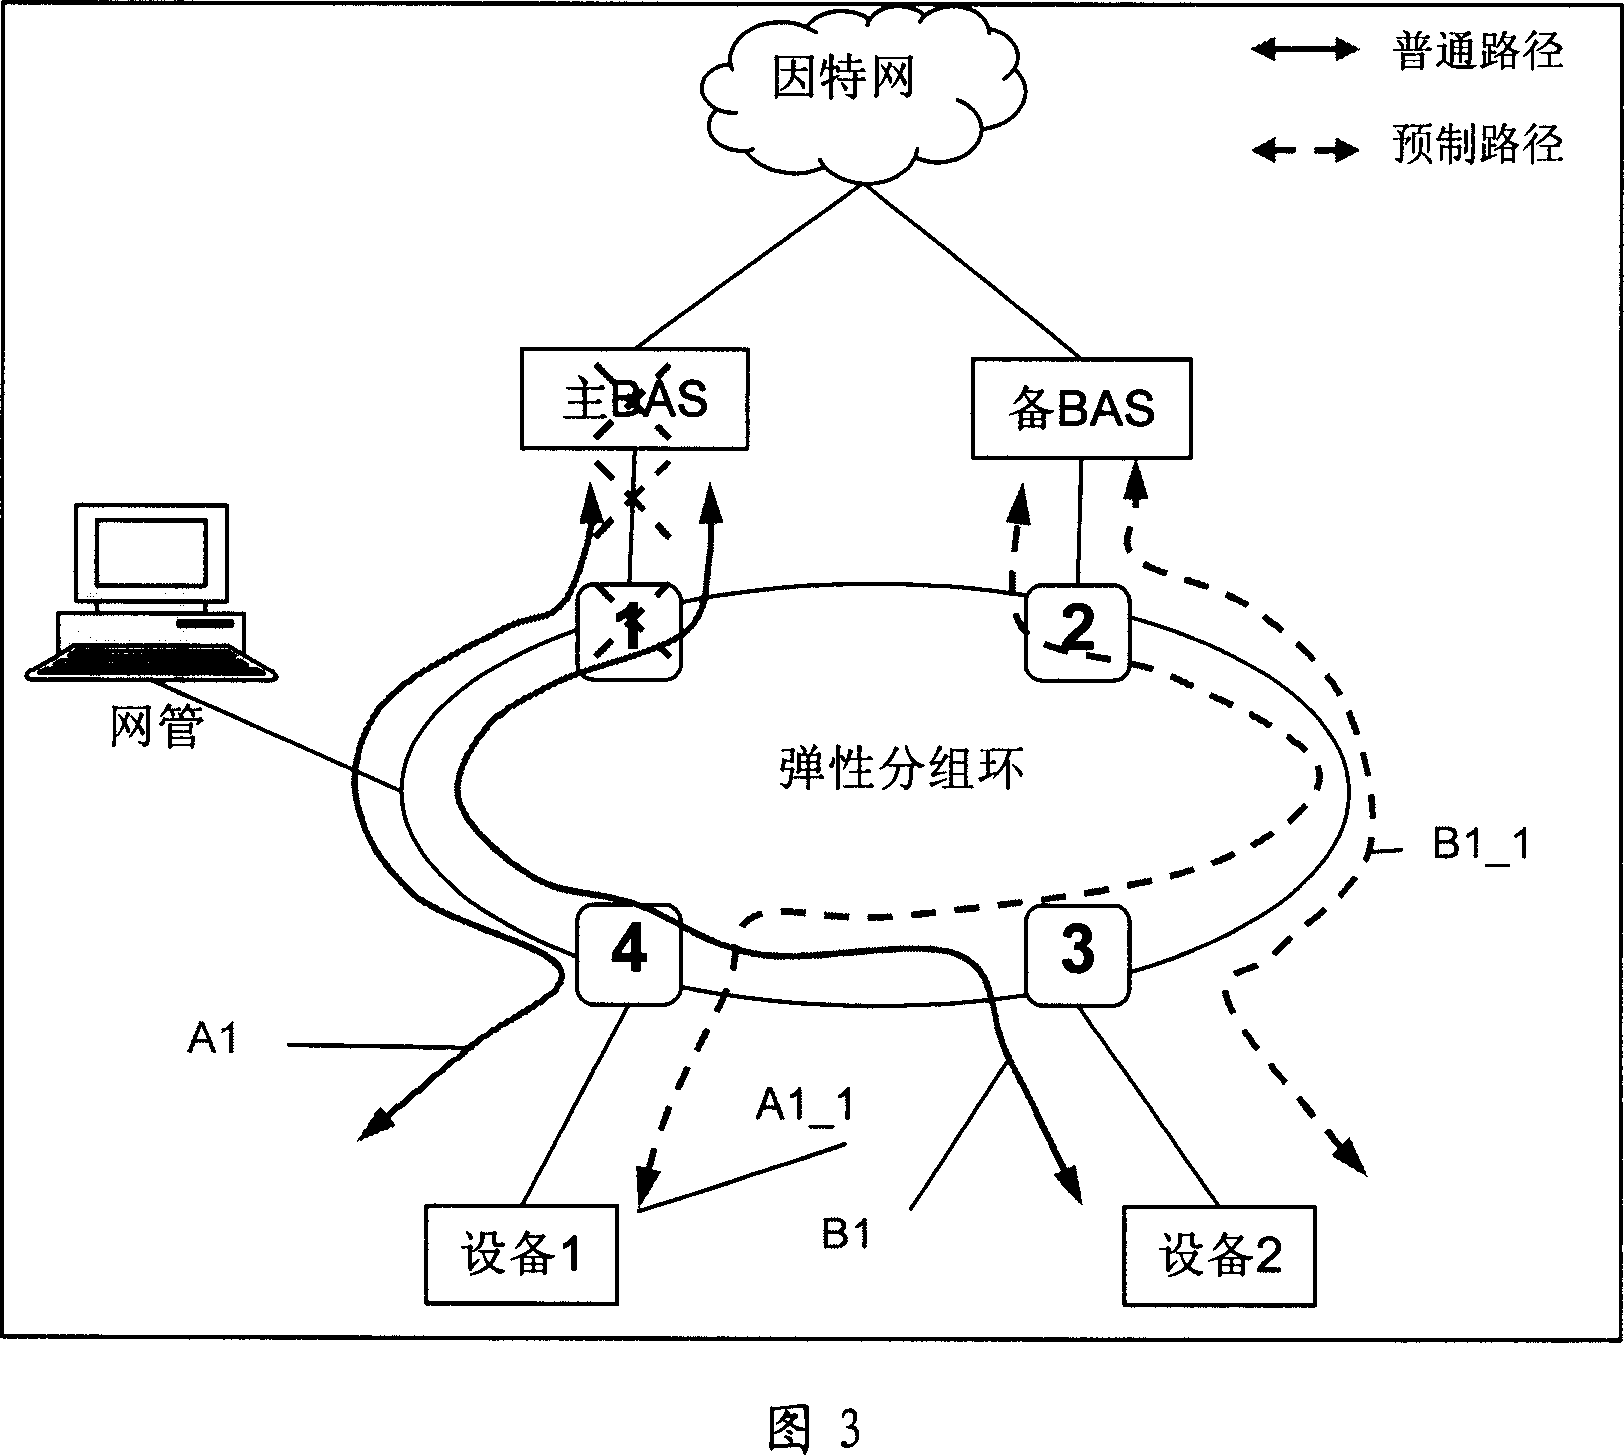 Method for protecting elastic group circular service